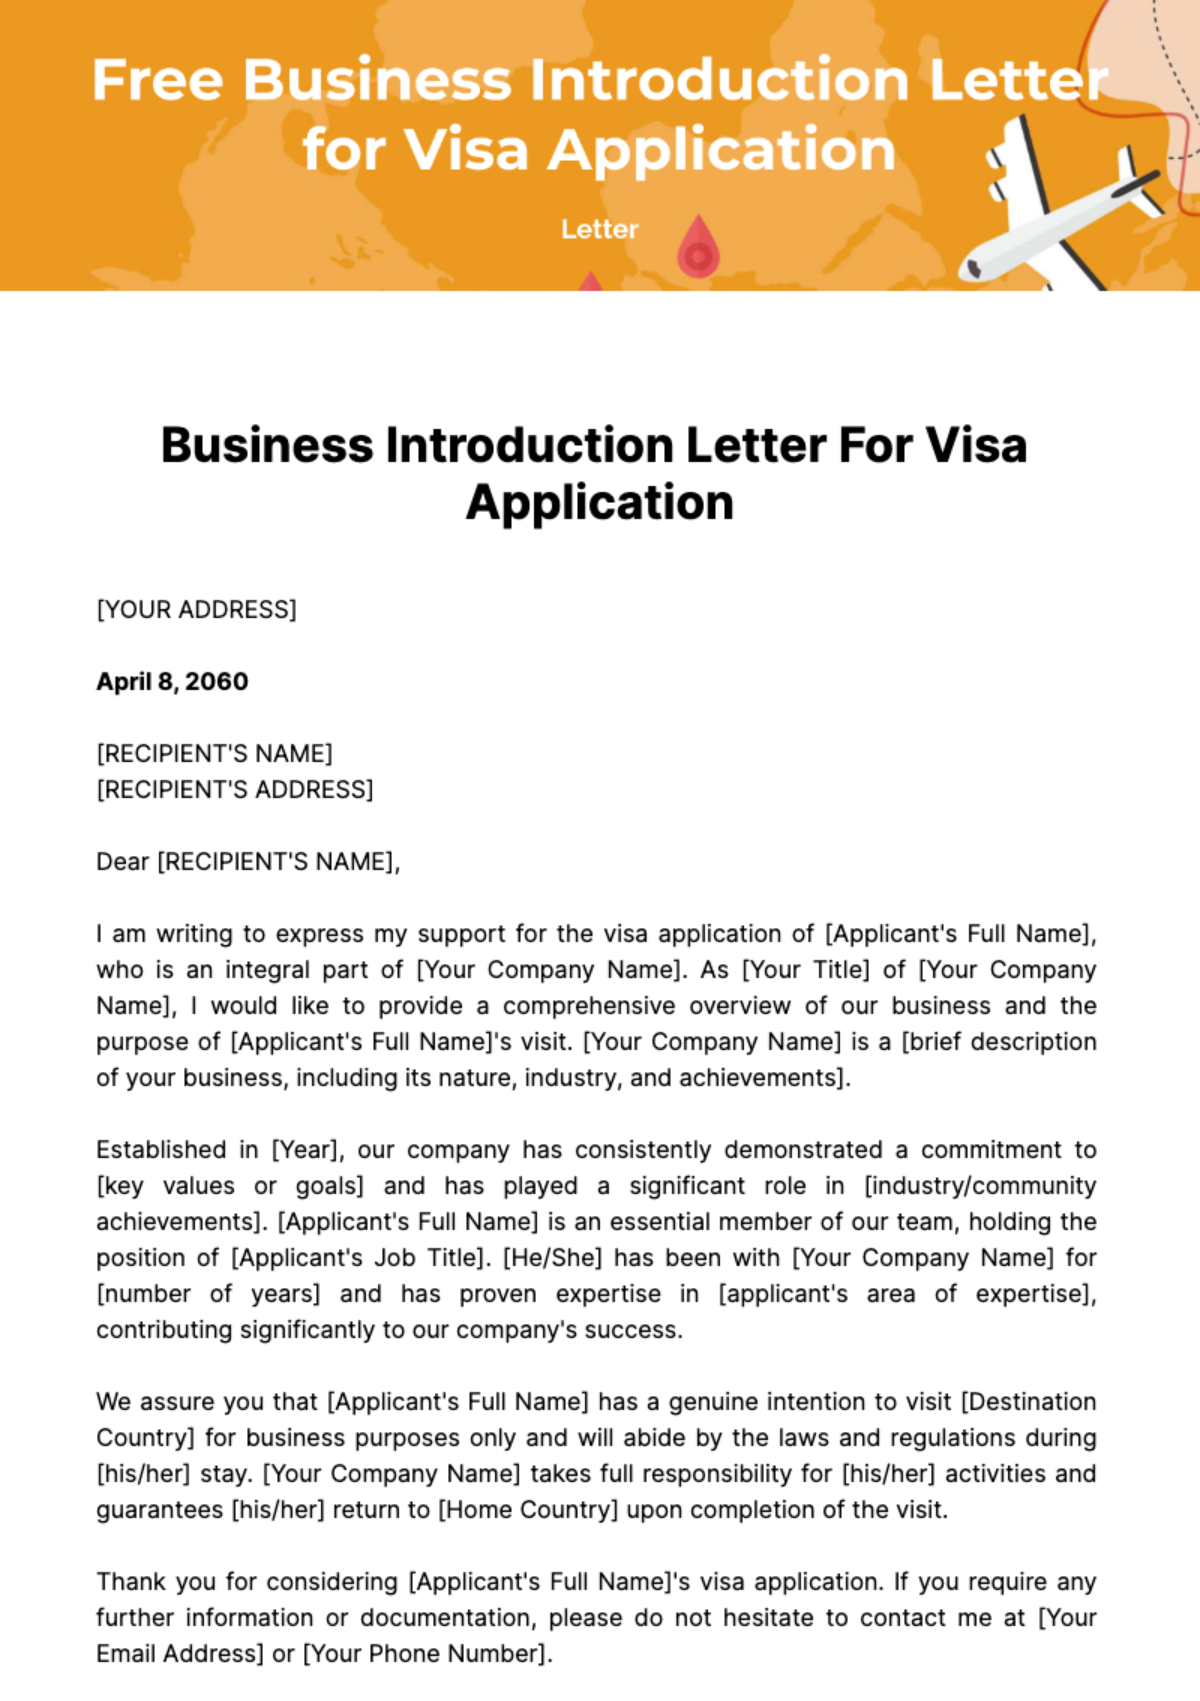 Free Business Introduction Letter for Visa Application Template